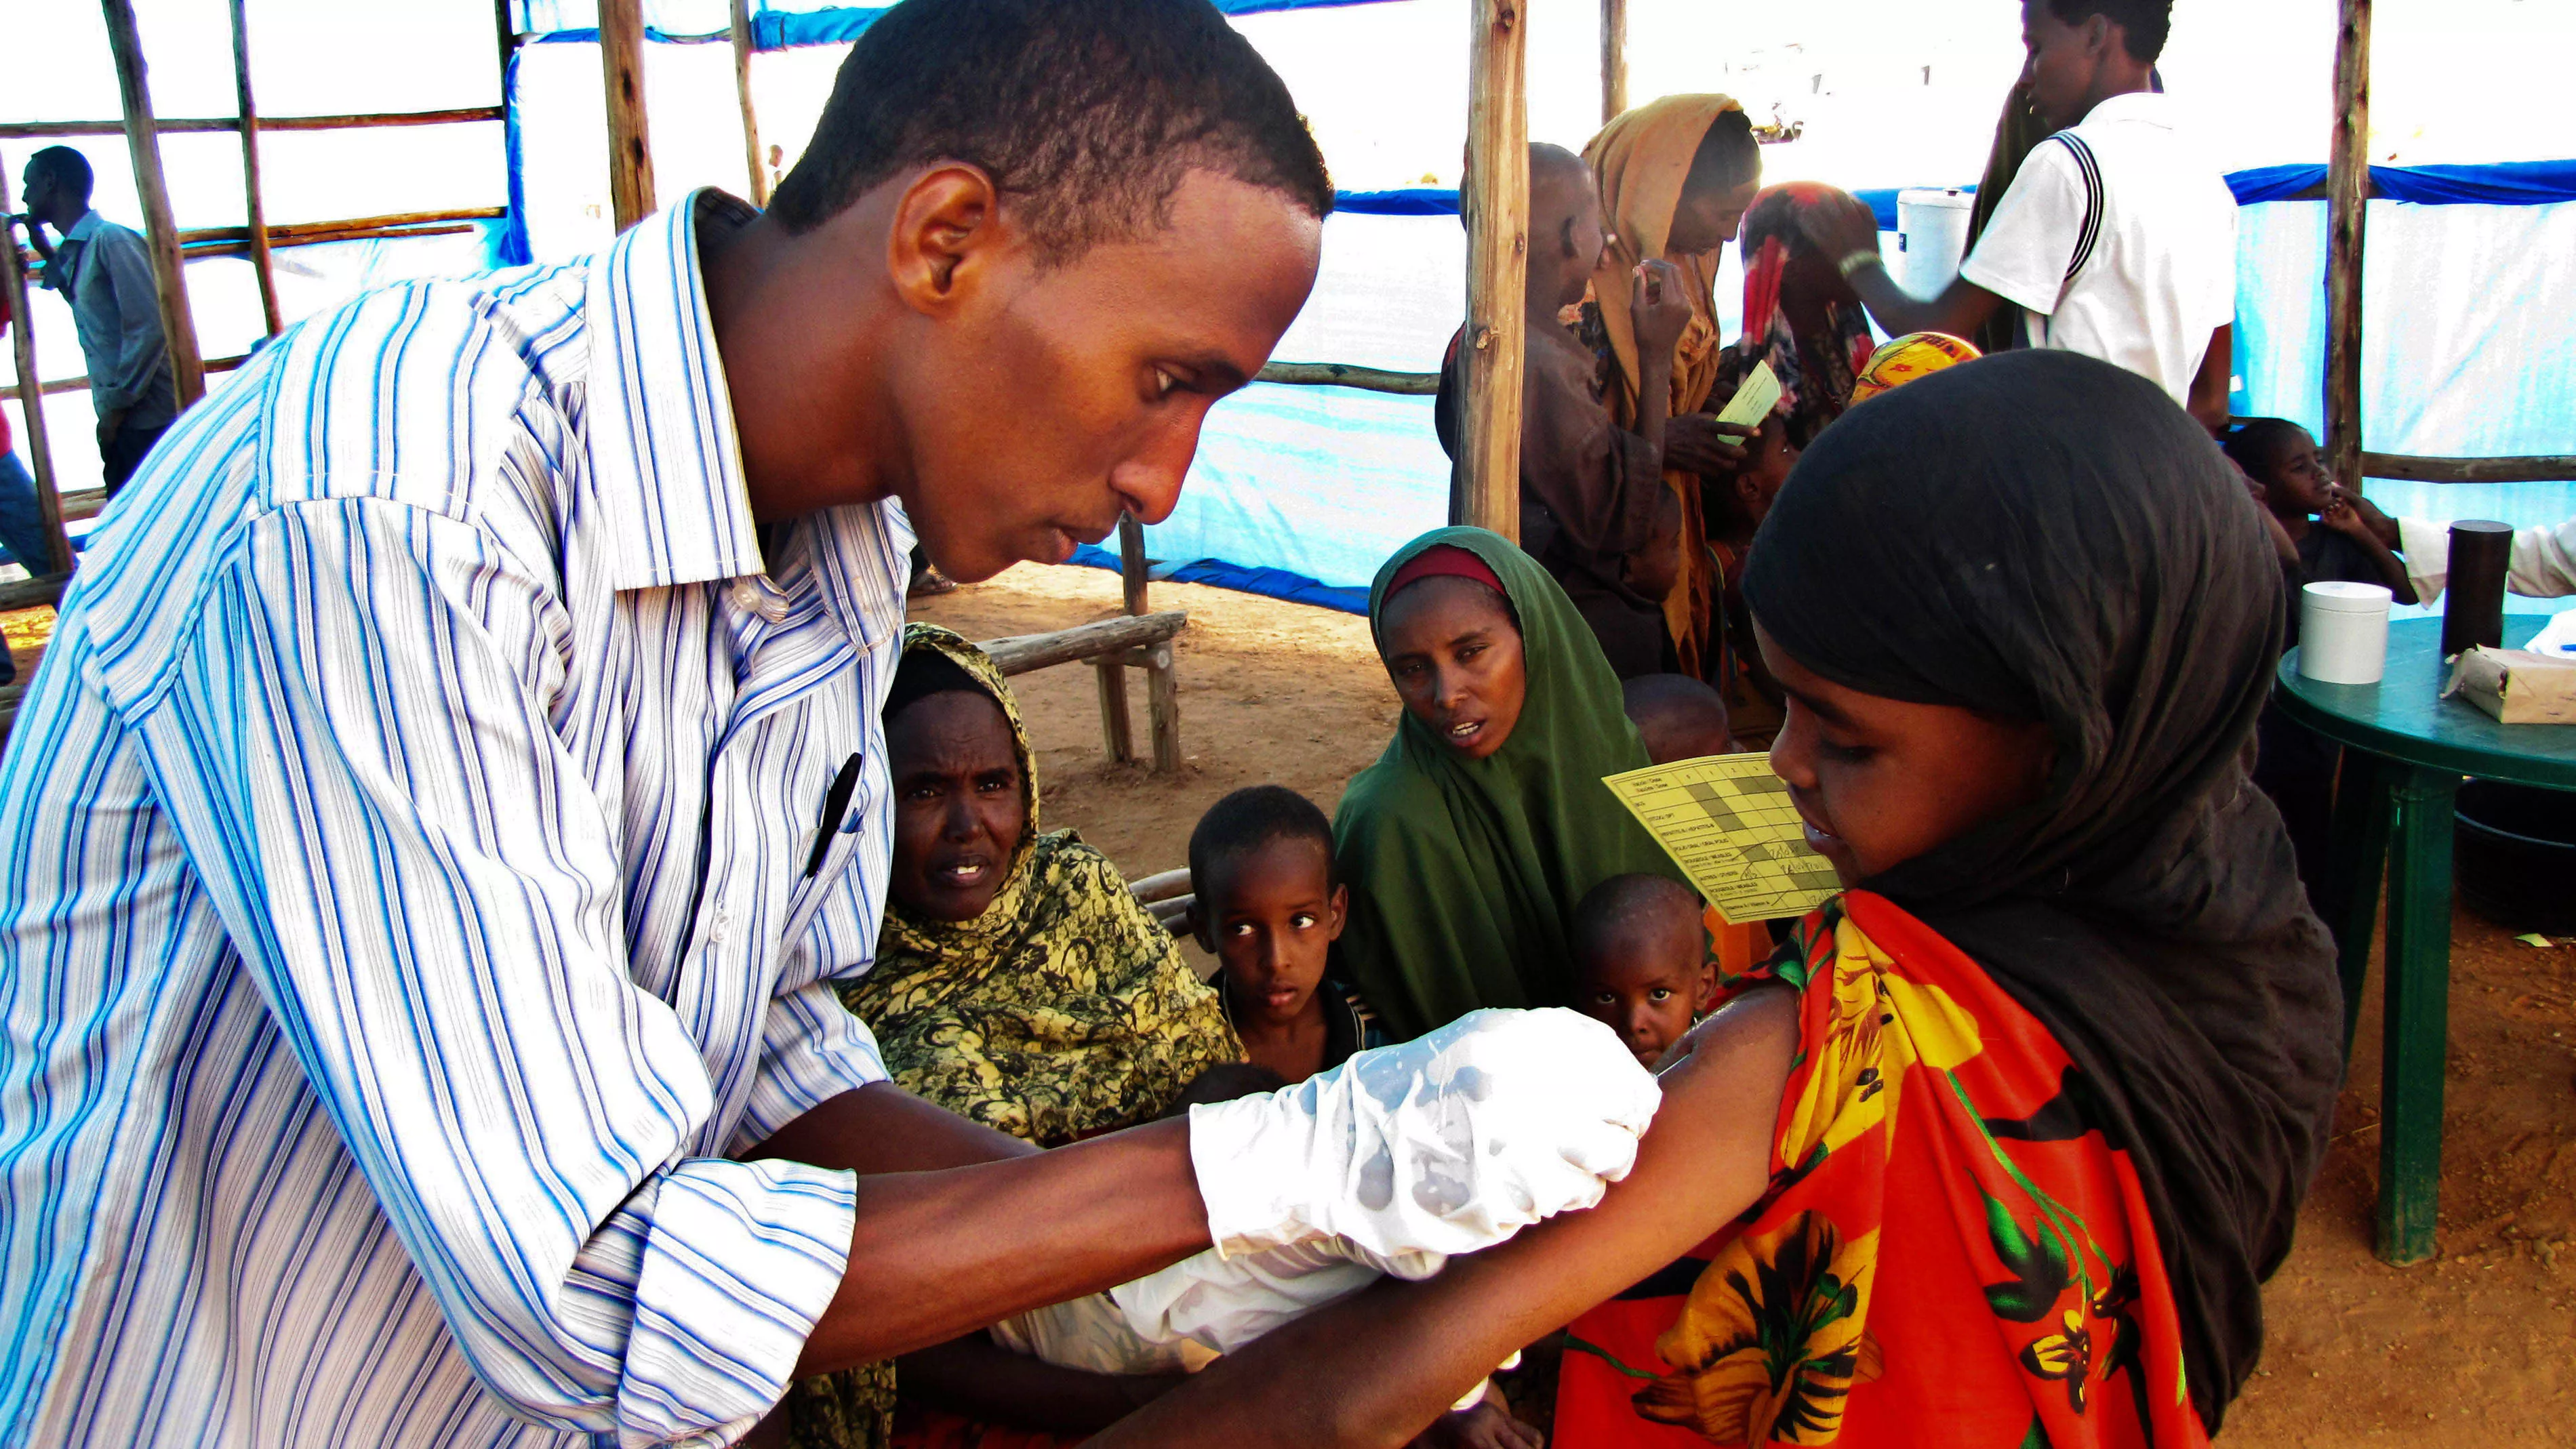 Measles vaccination. Some six hundred under-15s are vaccinated every day at the transit camp. Coupled with high levels of malnutrition, measles can be fatal.